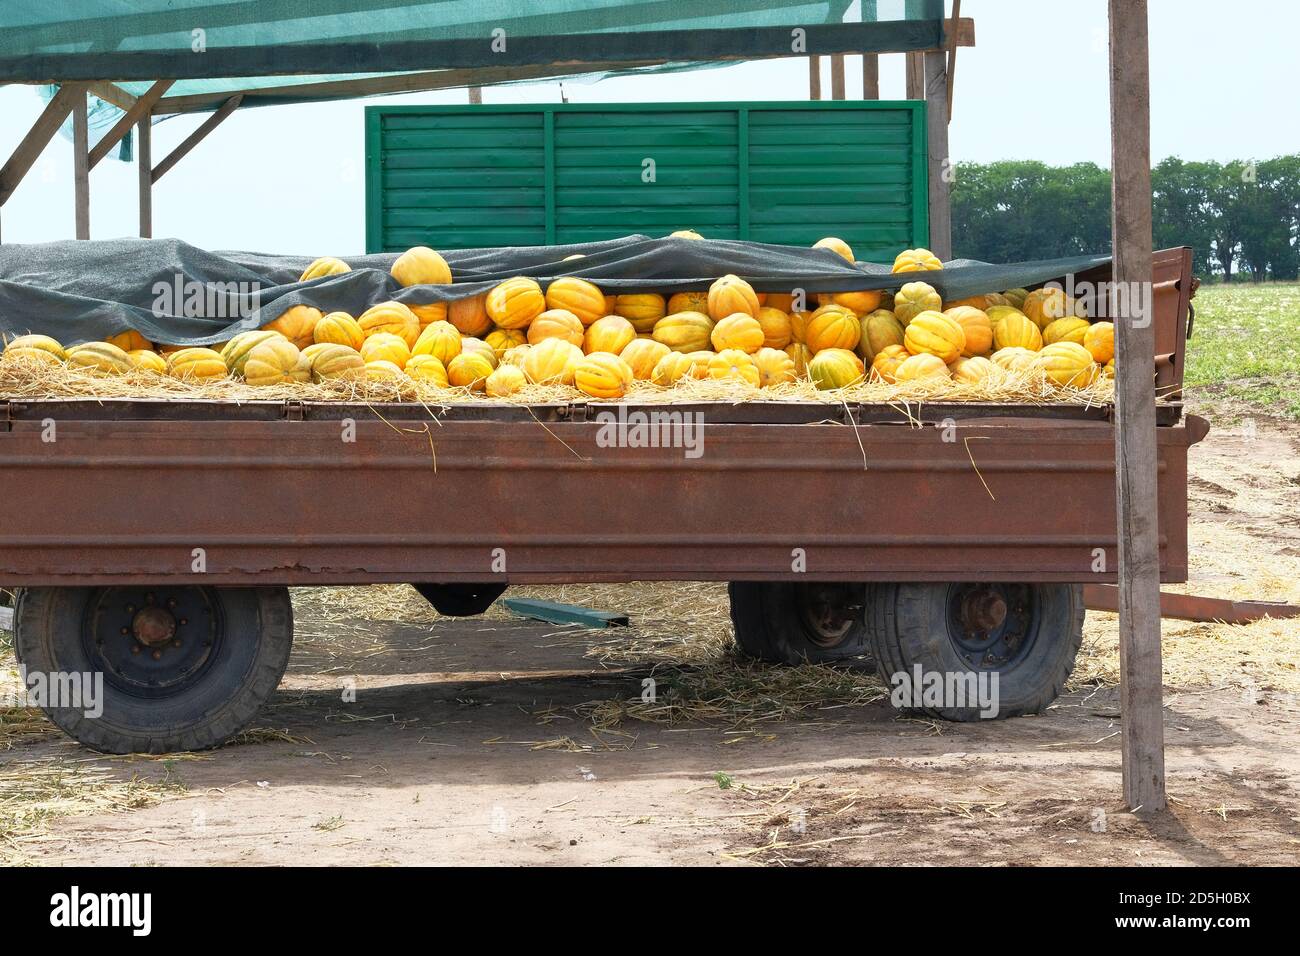 Melons are sold at farmers market after harvest. Healthy eating. Lots of juicy and ripe yellow melons. Stock Photo